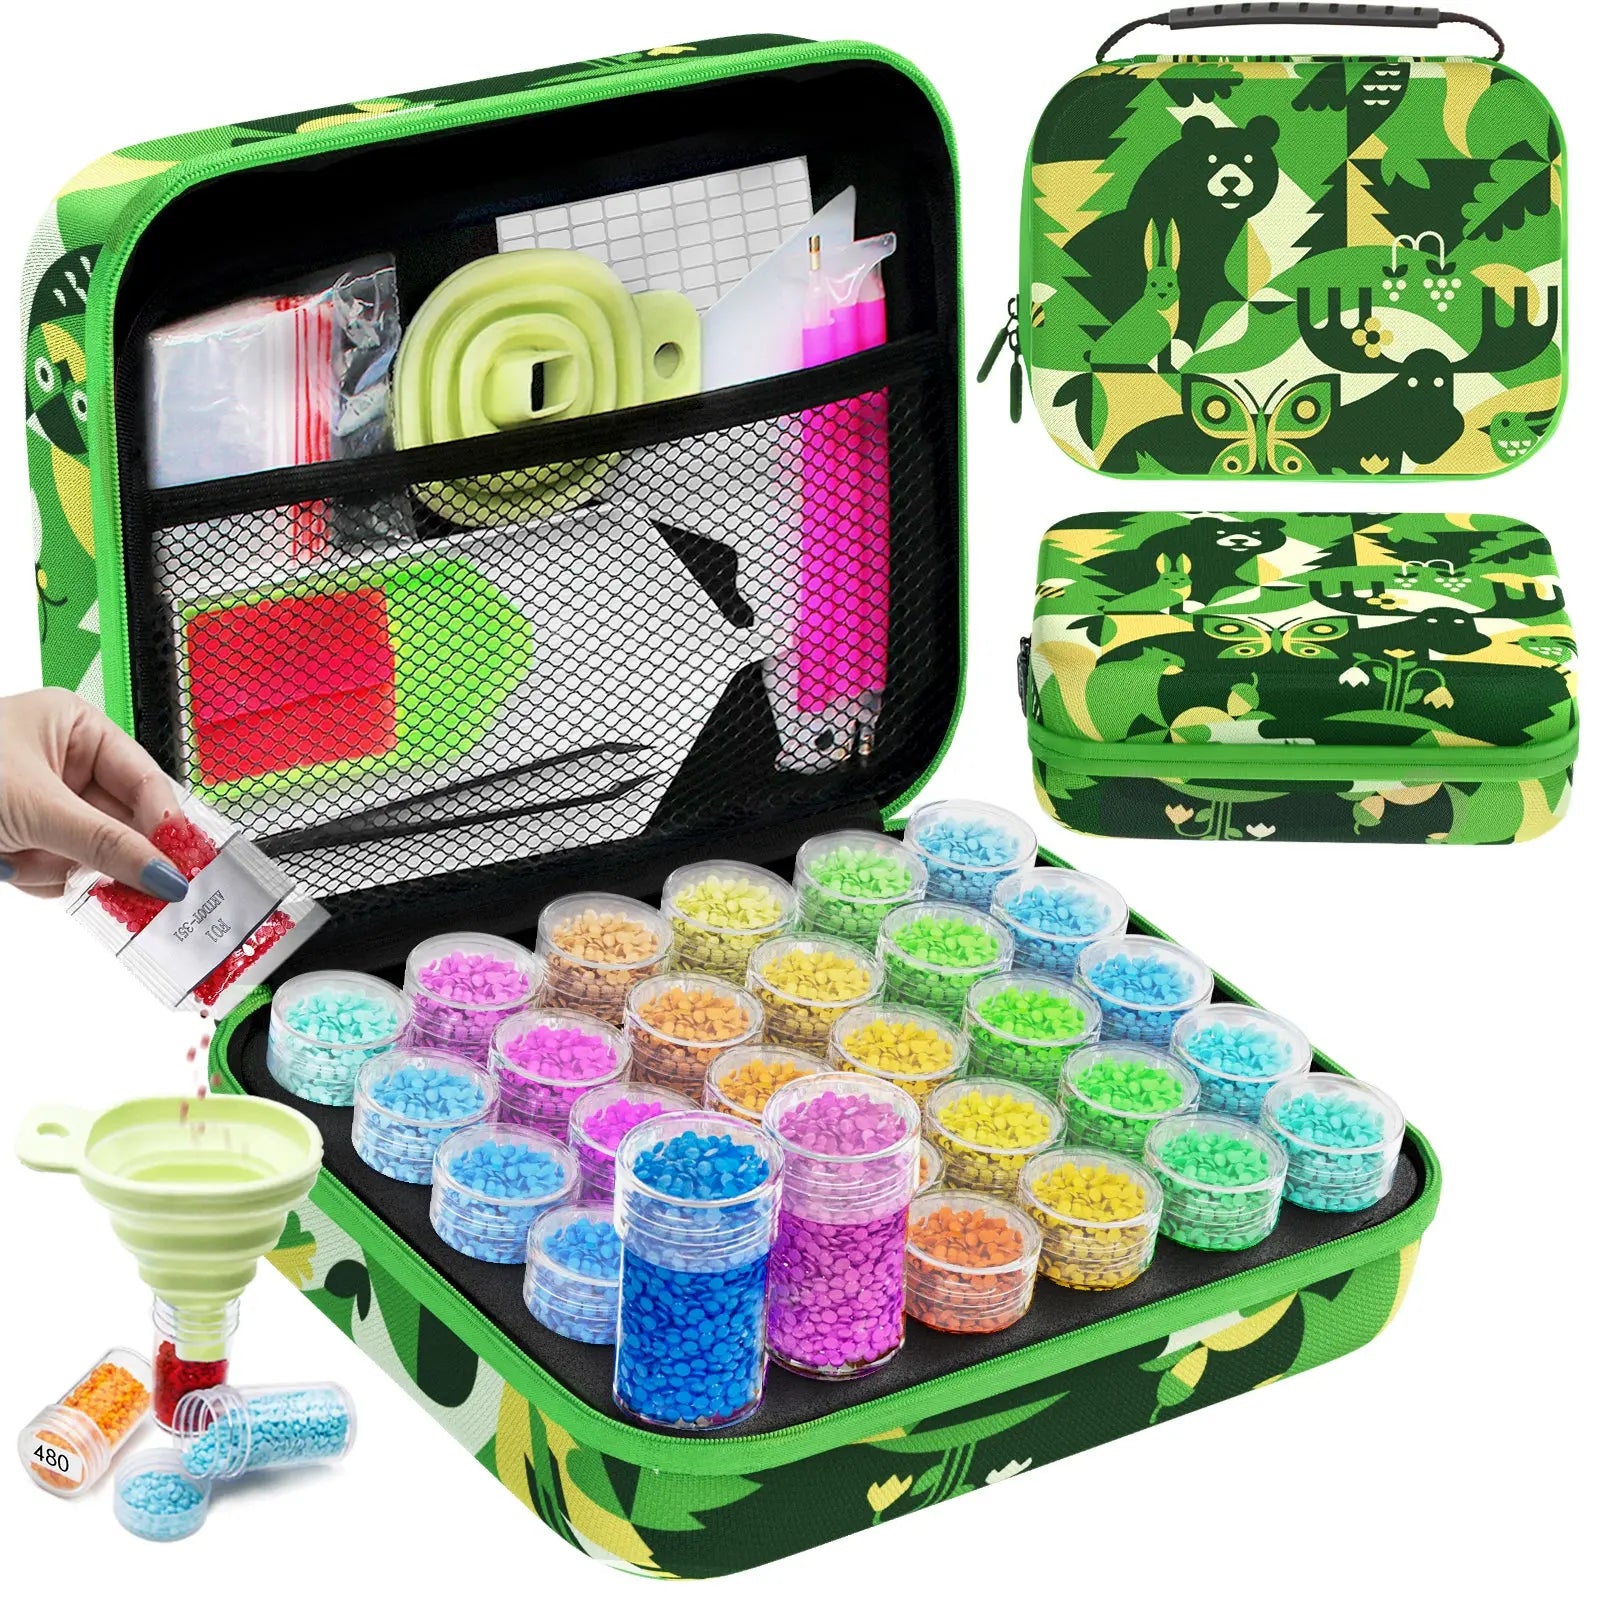 Butterfly Diamond Painting Tool Kit 87 in 1 Storage Container for Sale 20%  Off Today